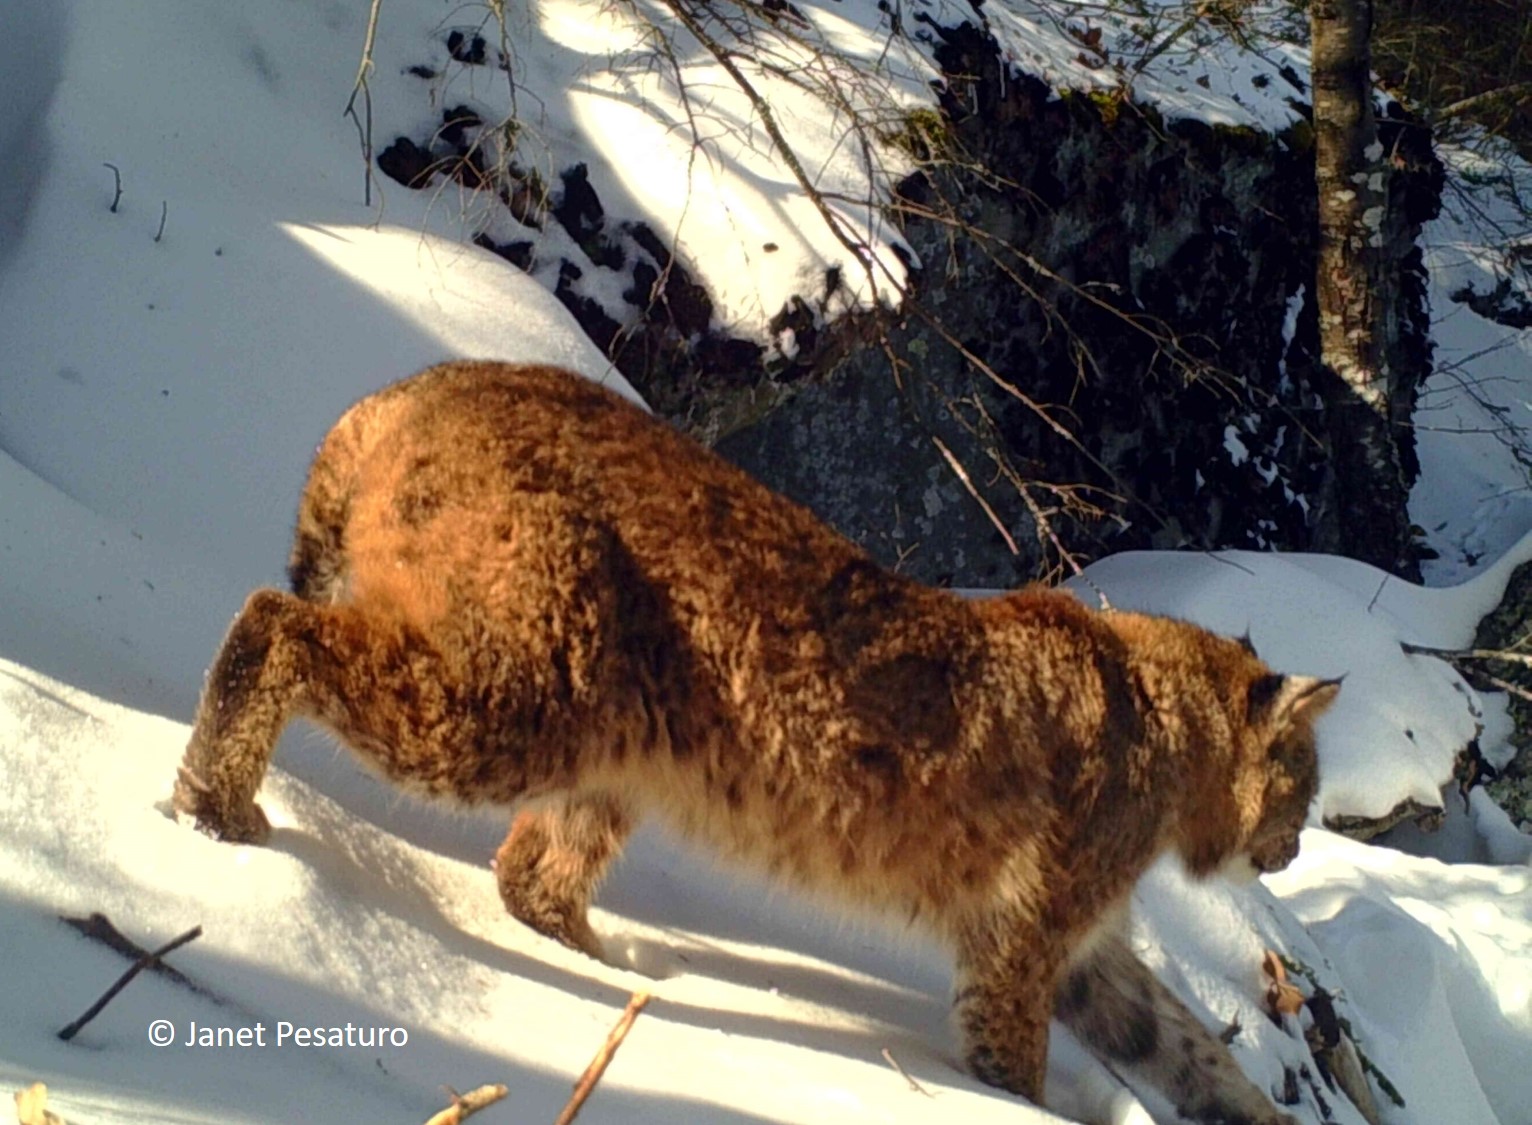 bobcat coat coloration in winter - lighting makes it look red